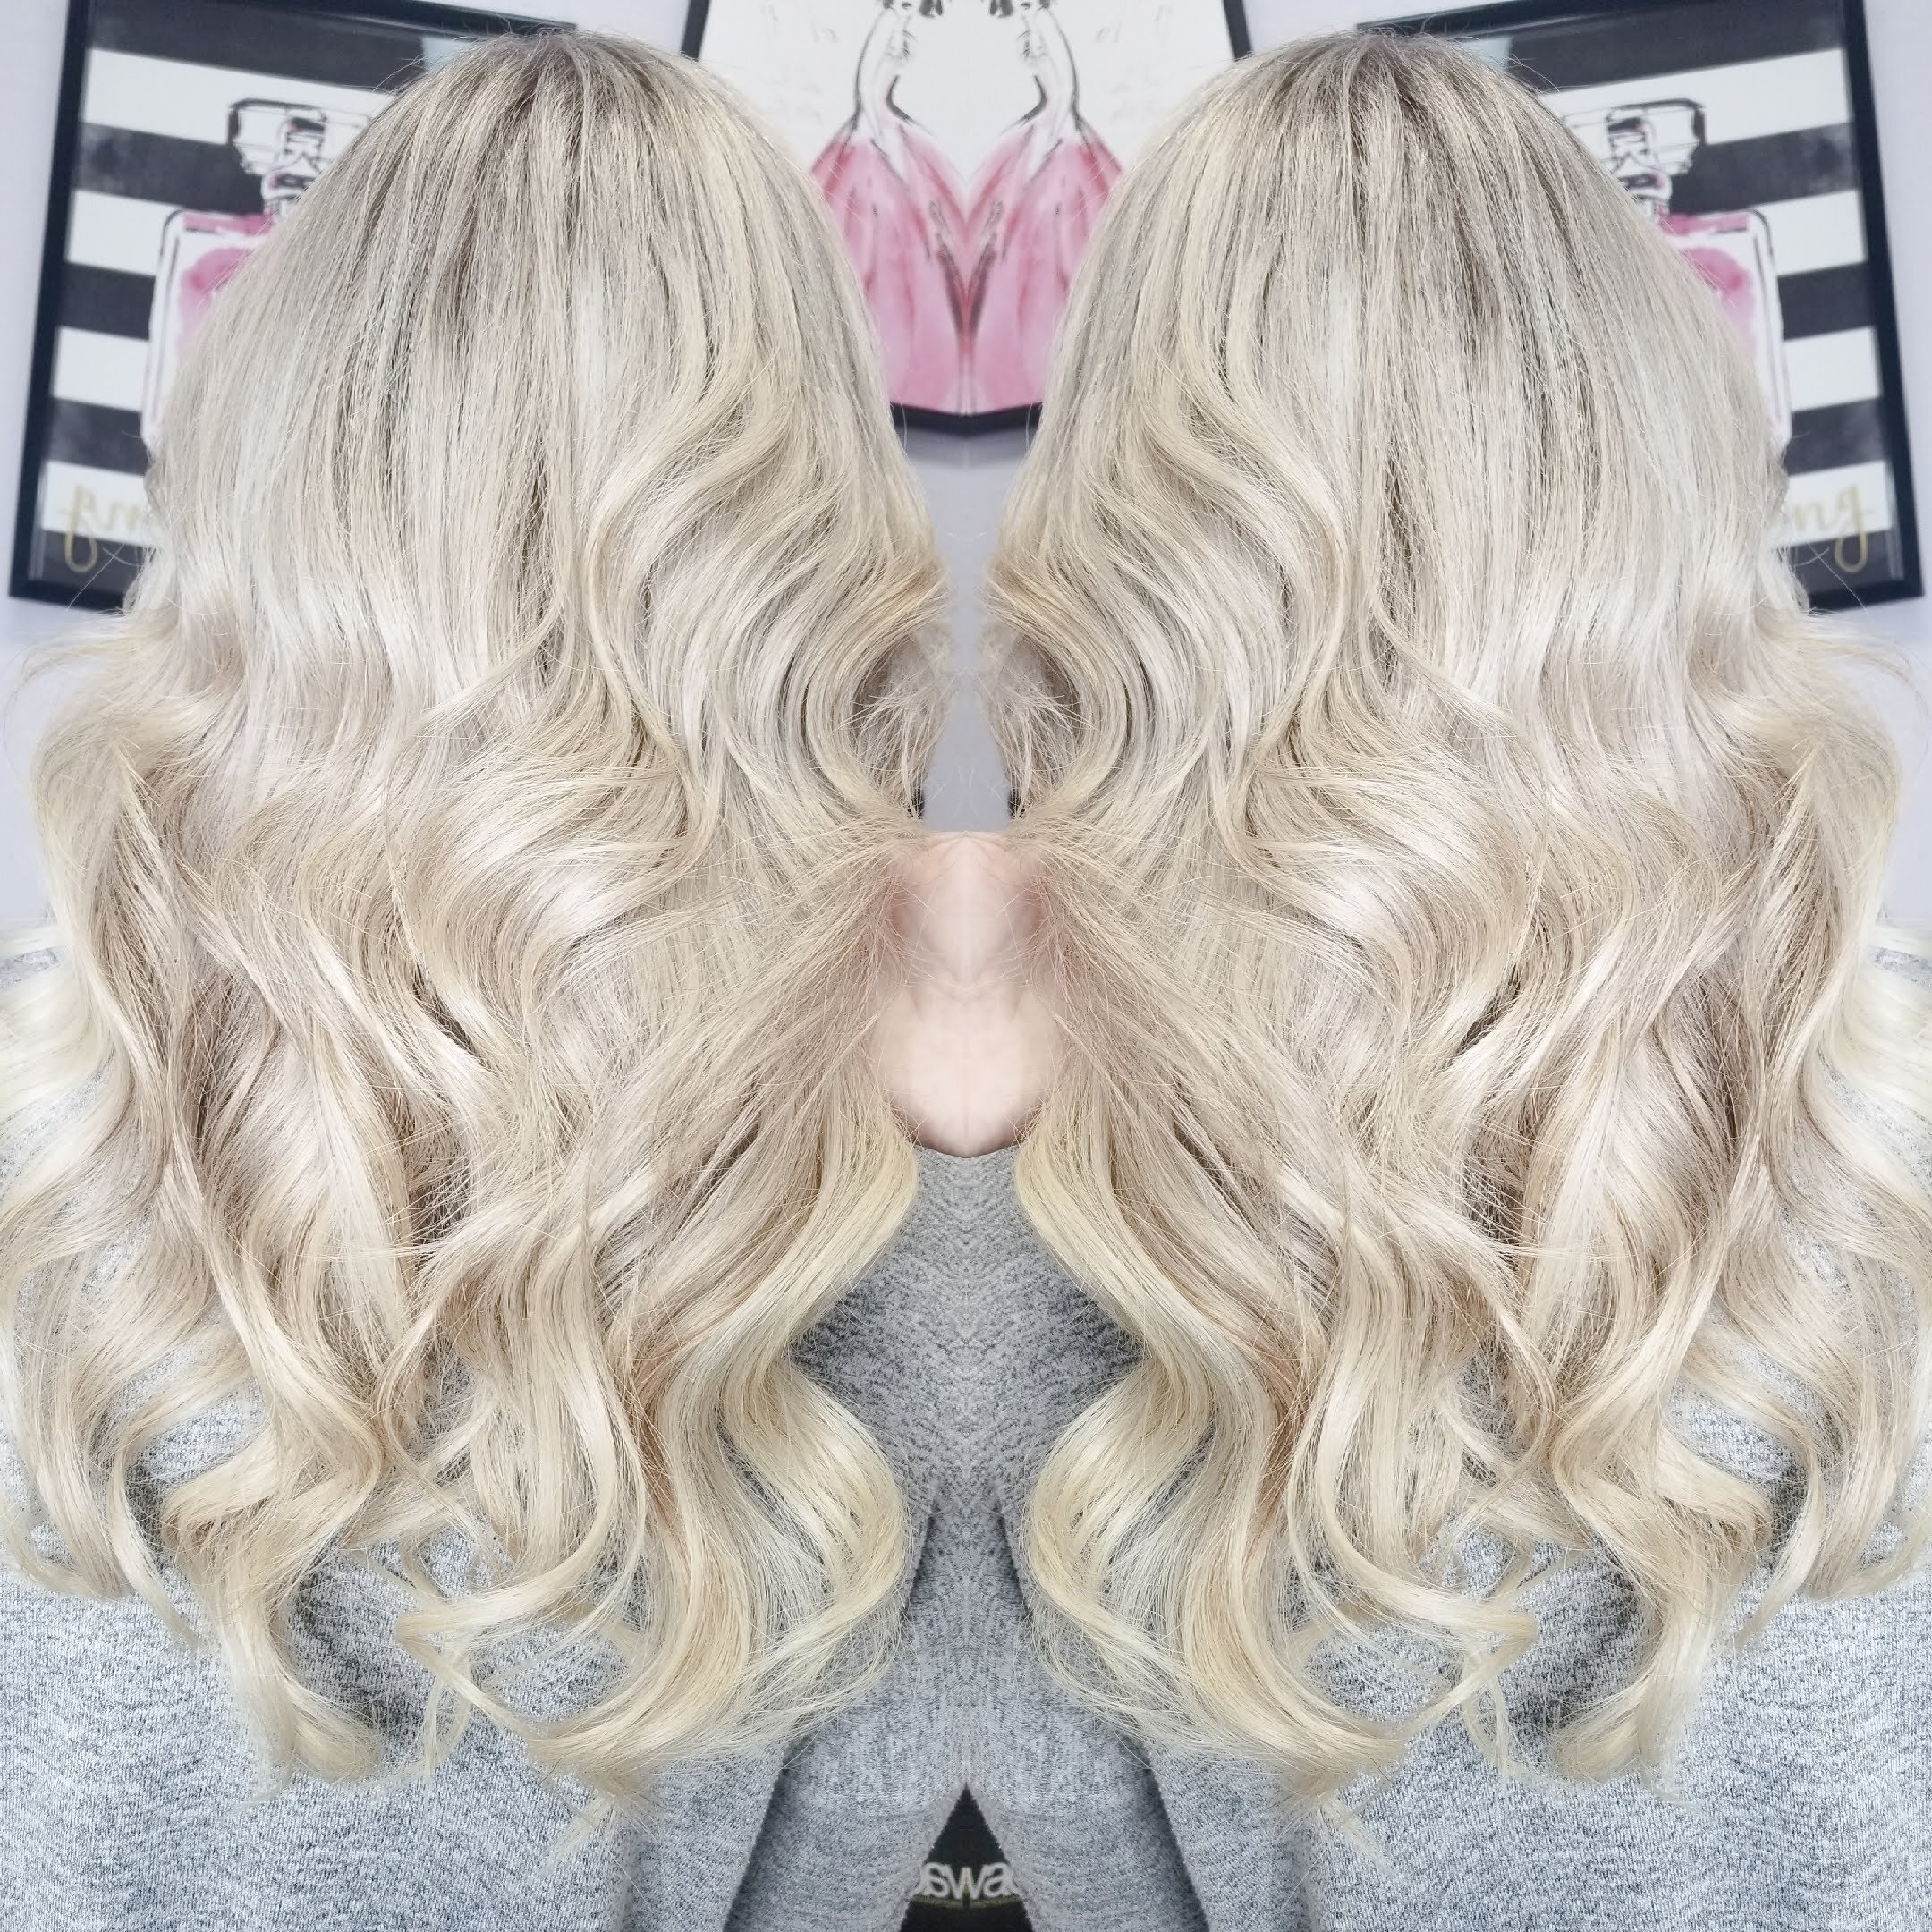 Bright blonde Highlights with Extensions